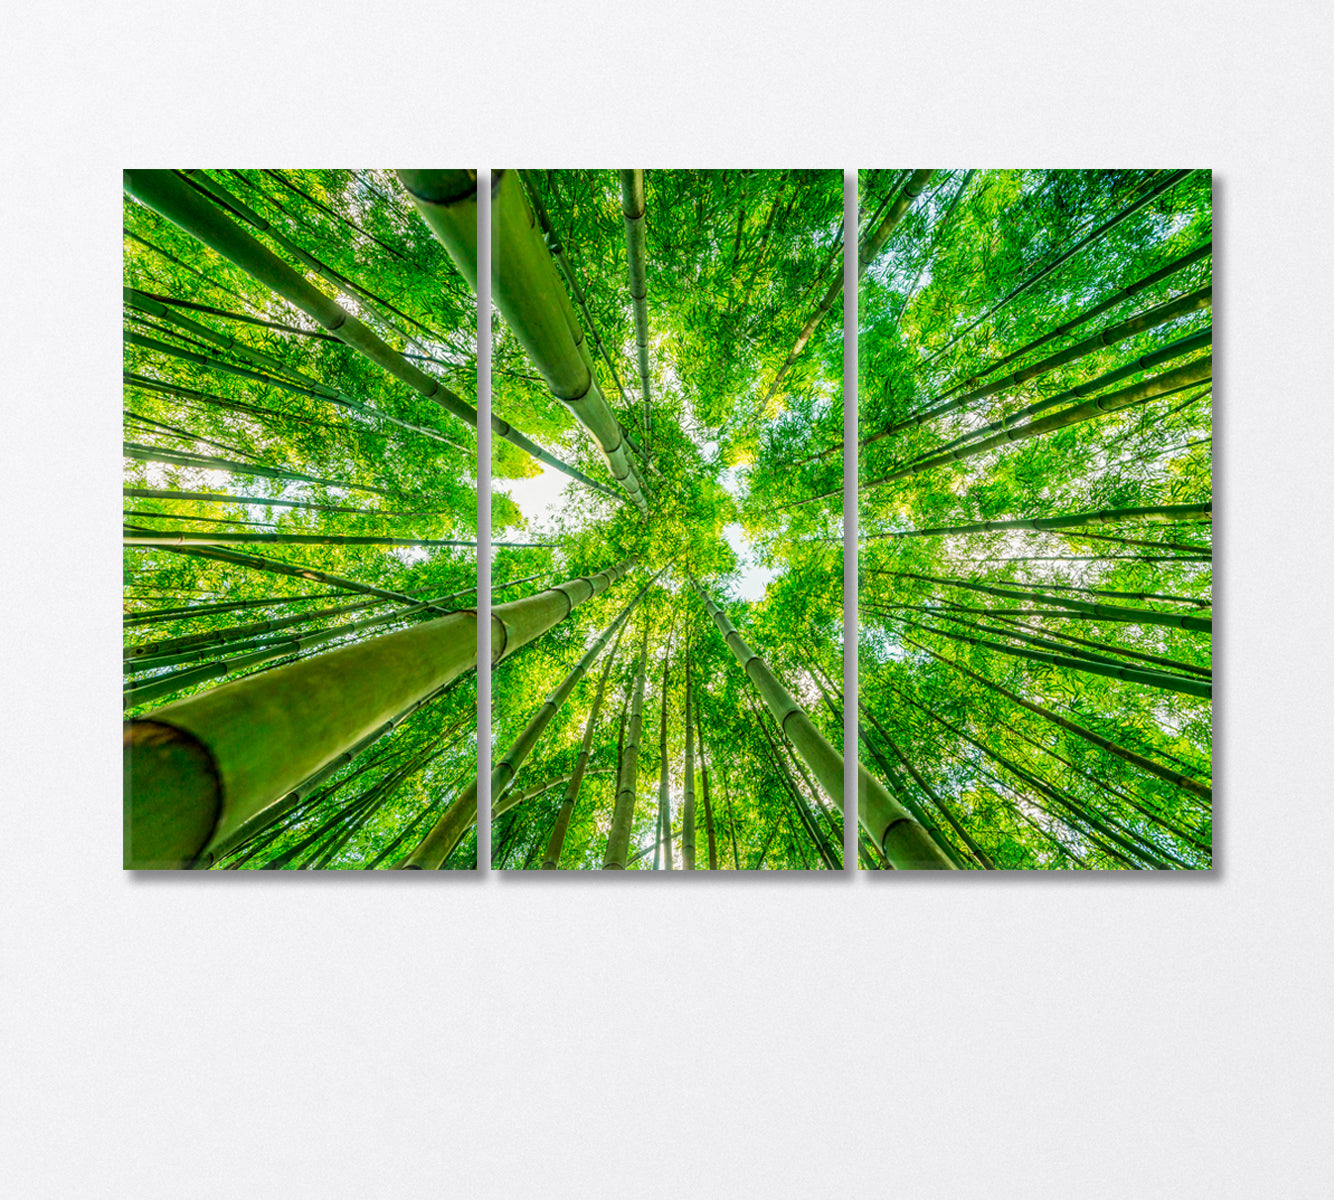 Green Bamboo Forest Bottom View Canvas Print-Canvas Print-CetArt-3 Panels-36x24 inches-CetArt